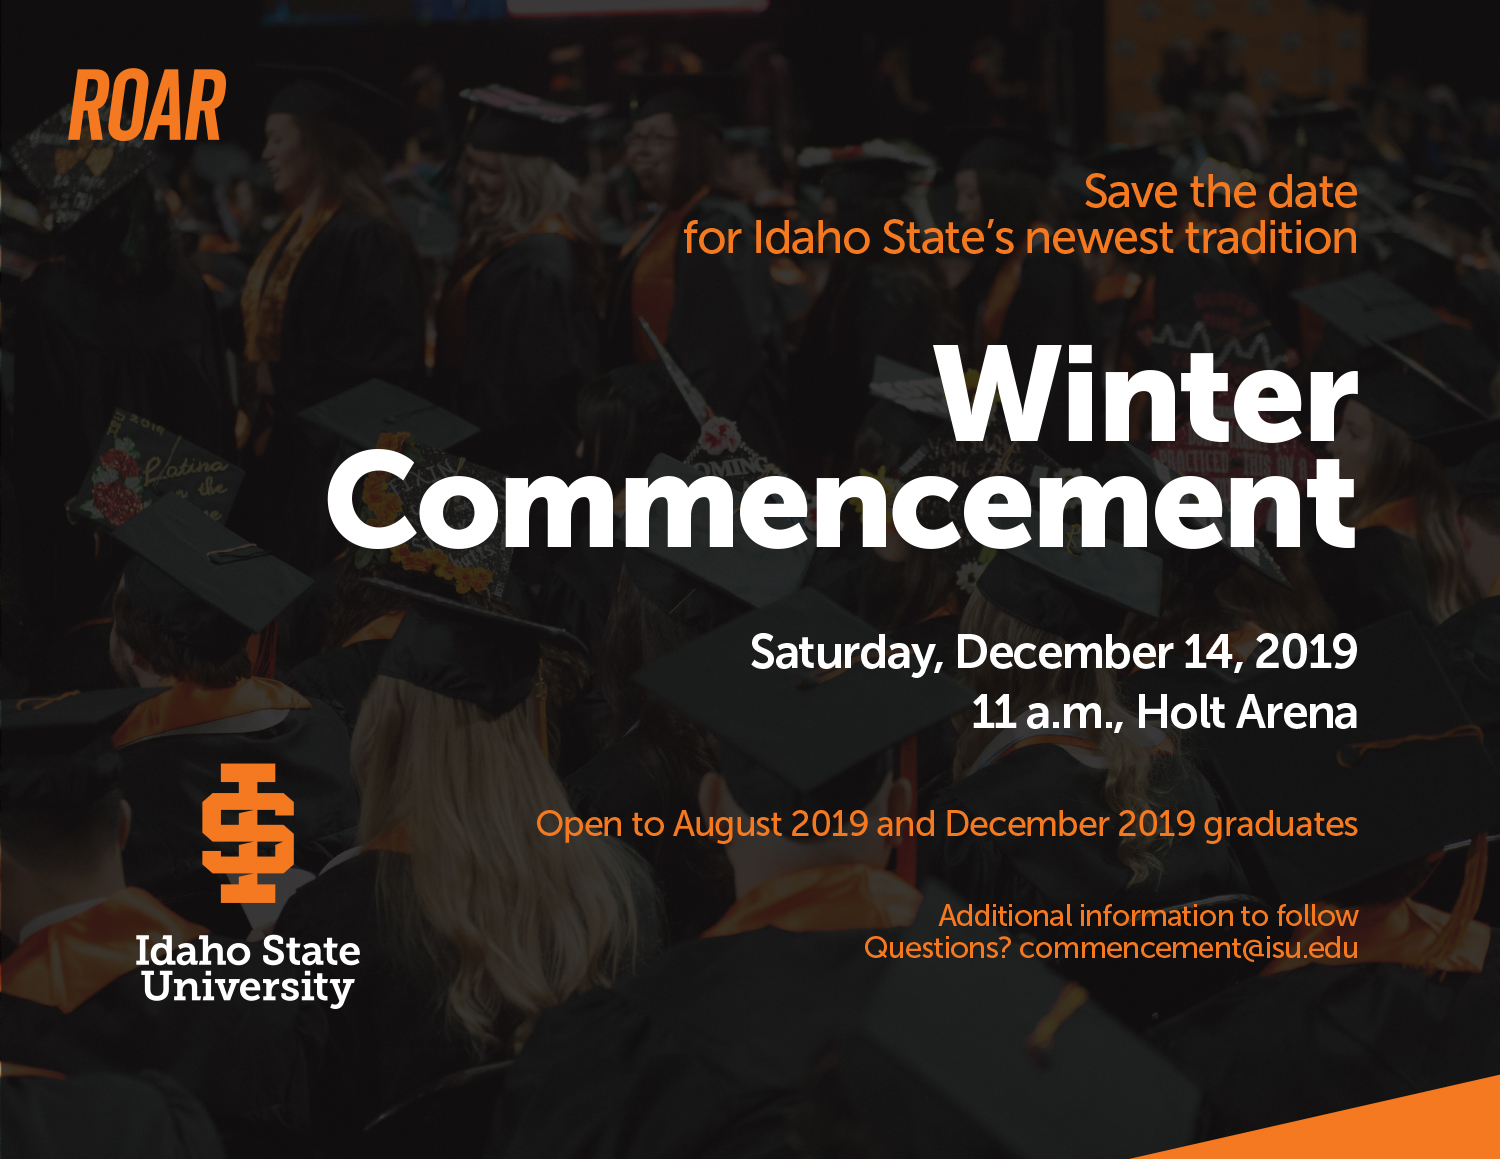 Save the date for Idaho State's newest tradition Winter Commencement Saturday, December 14, 2019 11 a.m., Holt Arena Open to August 2019 and December 2019 graduates Additional information to follow. Email commencement@isu.edu with questions